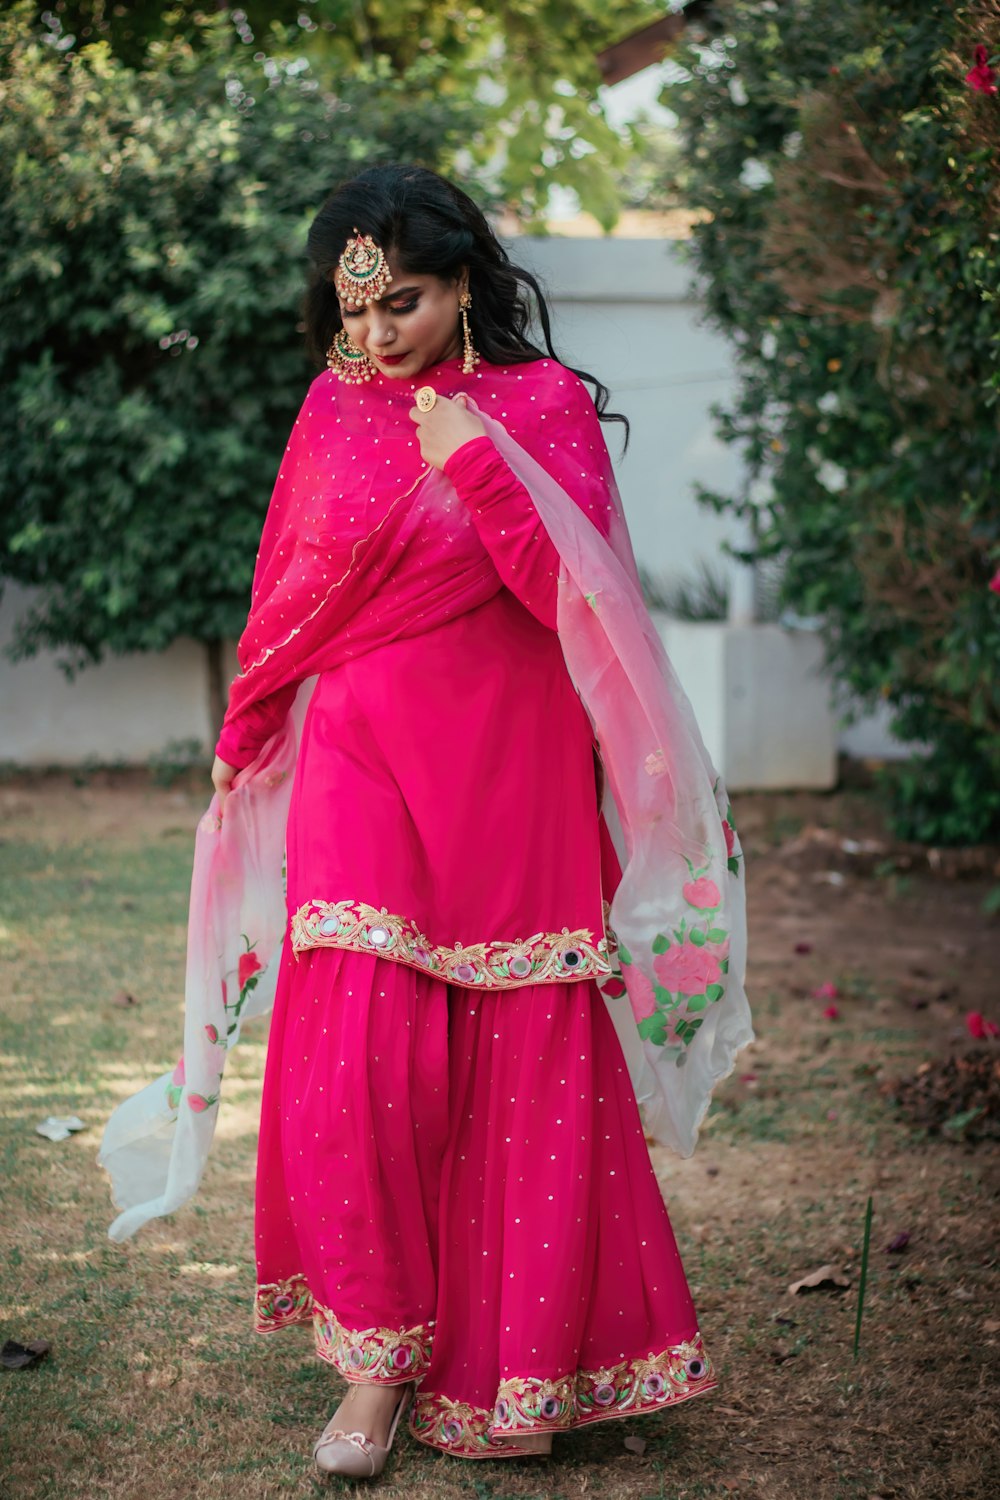 woman in pink and red sari standing on green grass field during daytime